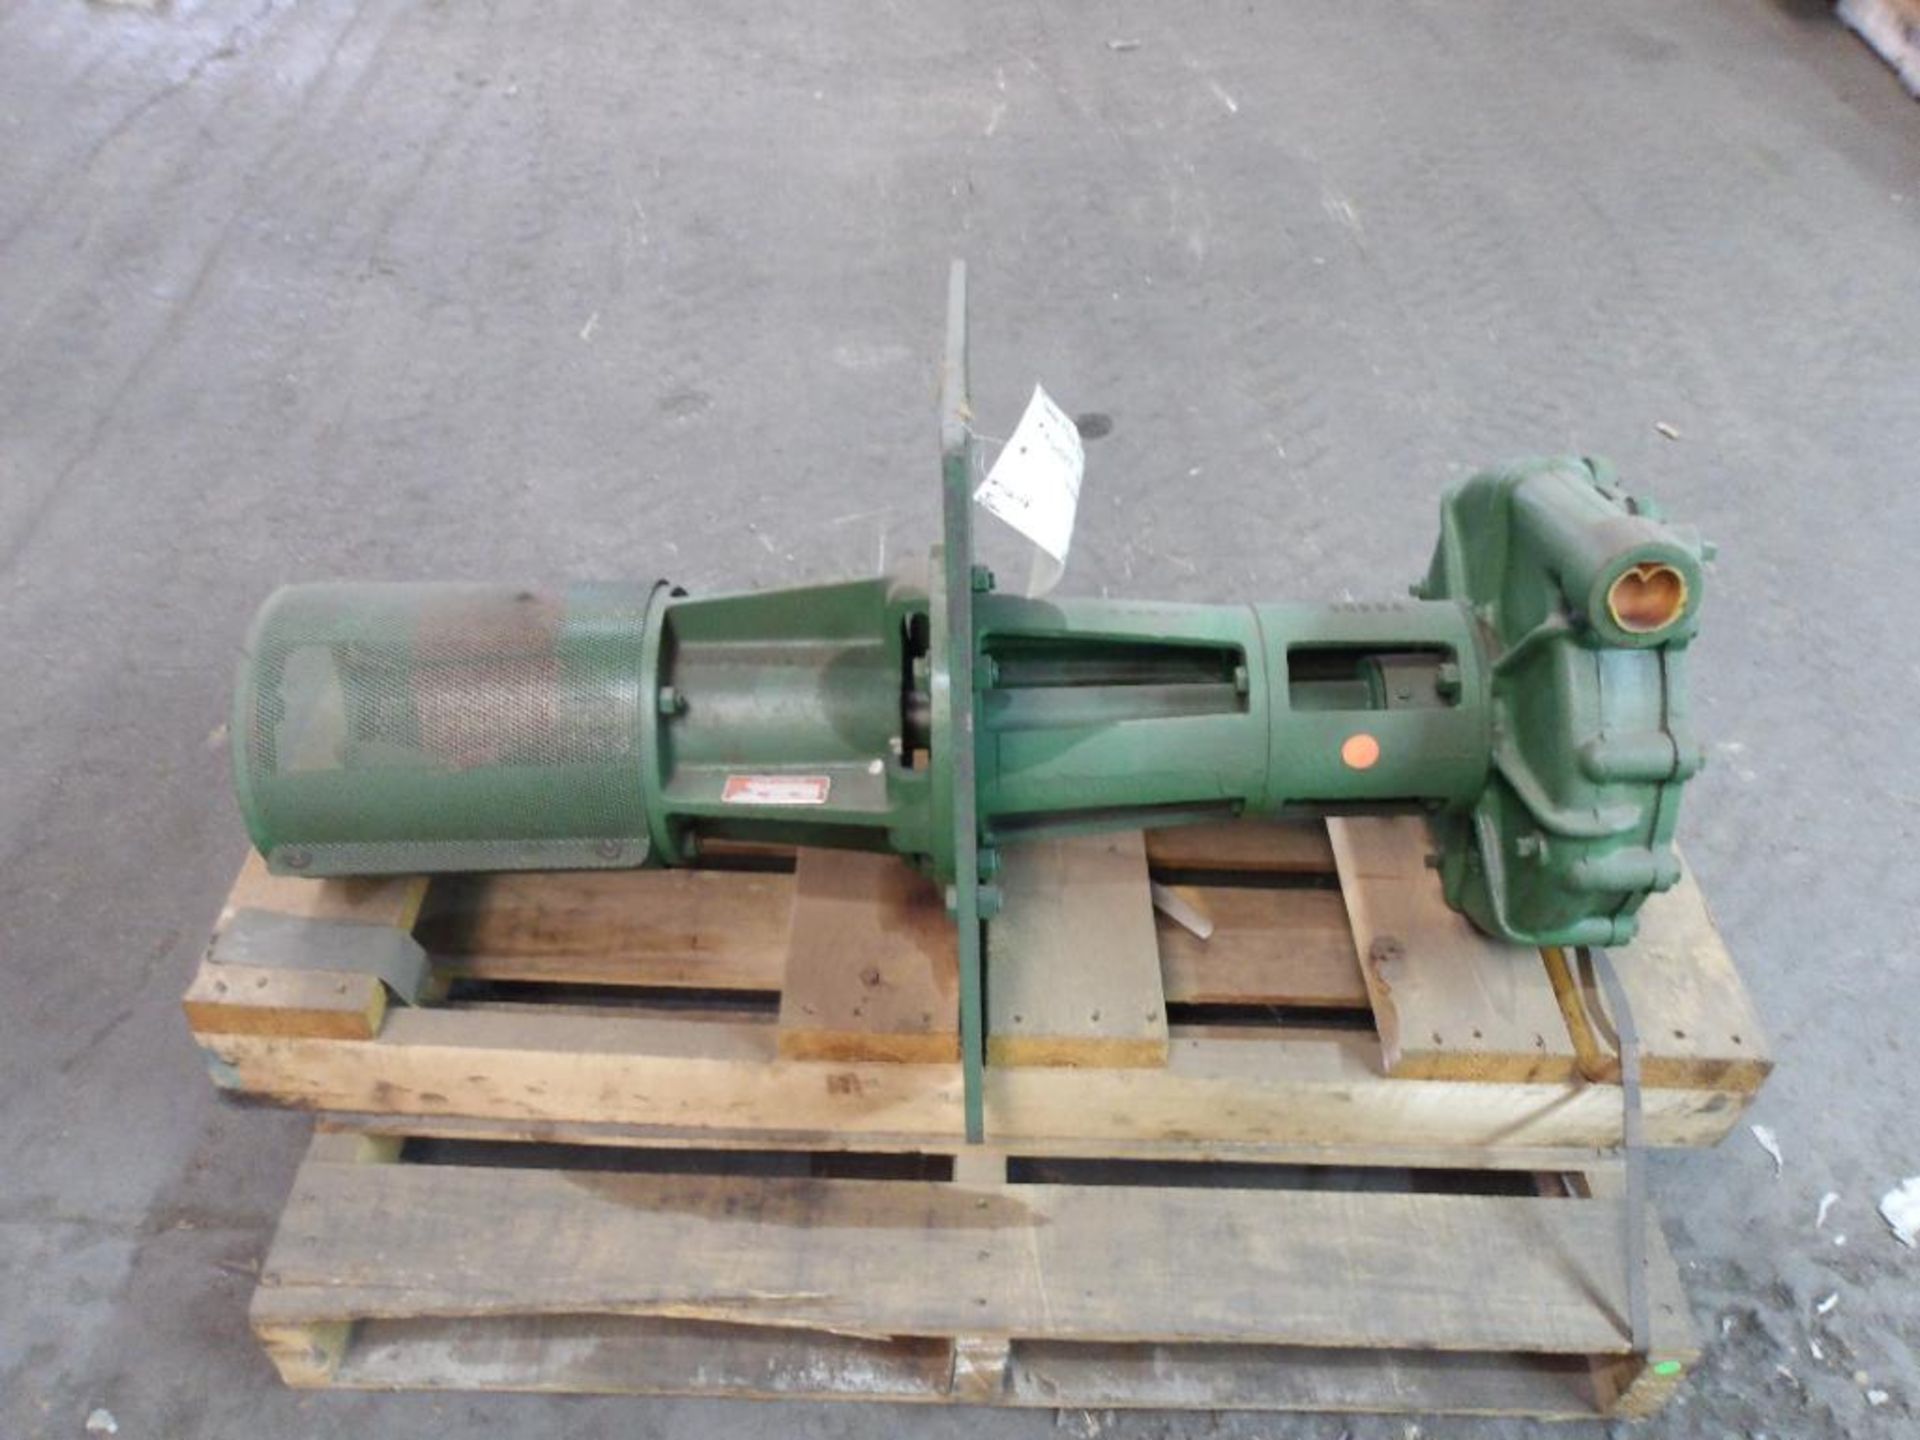 (New) Tramco Shallow Well Pump, Model 1/1-2L, 12" Imp, Iron (No Motor)